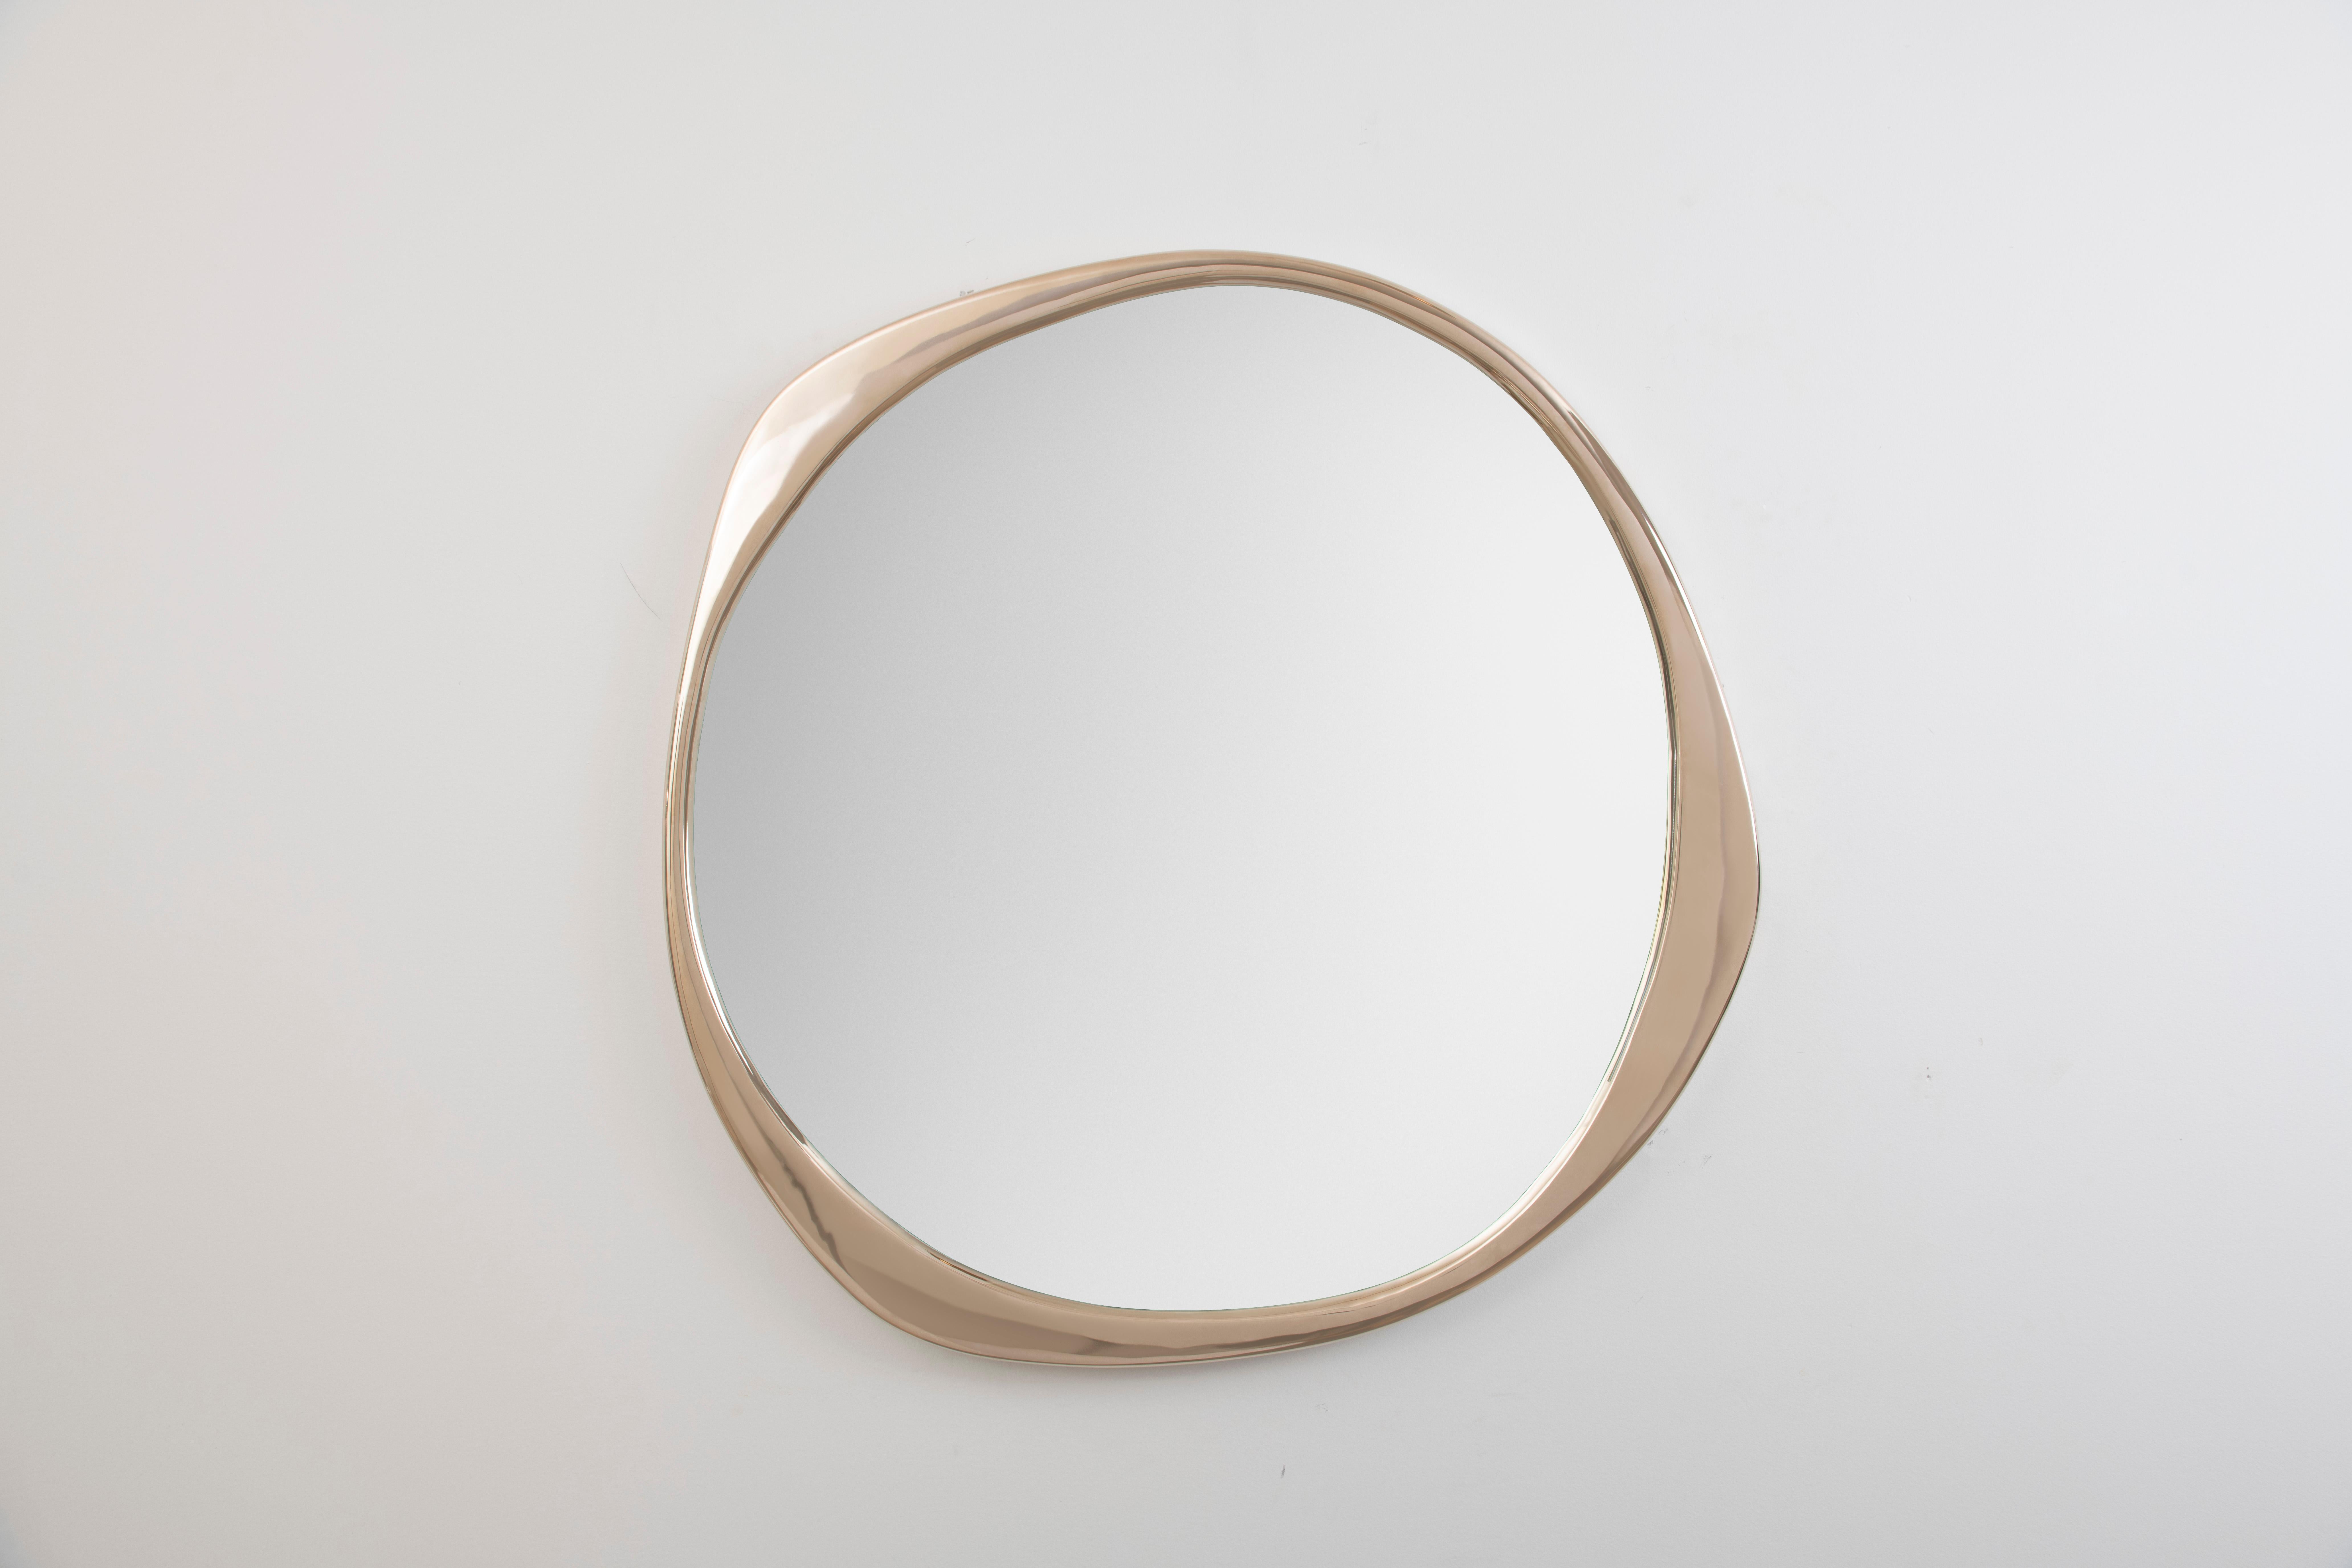 The sculptural A.Cepa Mirror in Polished Bronze is cast in bronze at a fine art foundry in Pennsylvania, and skillfully polished by hand. Undulating and irregular in form, the A. Cepa mirror is the focal point in any room with its captivating